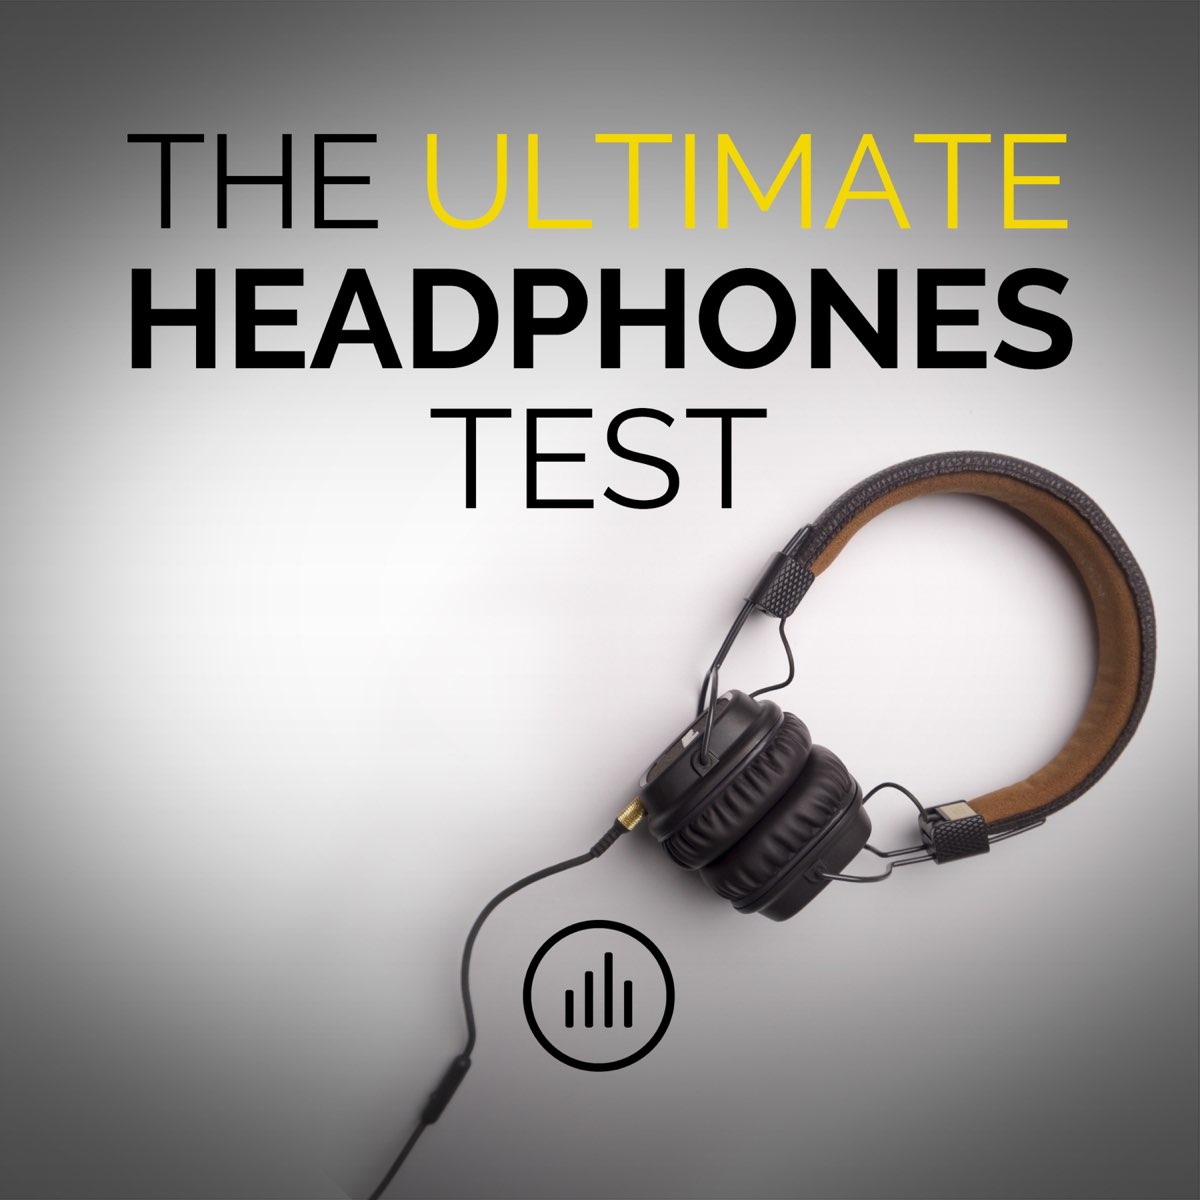 The Ultimate Headphone Test (Original Audiocheck Test Tones) by myNoise on  Apple Music